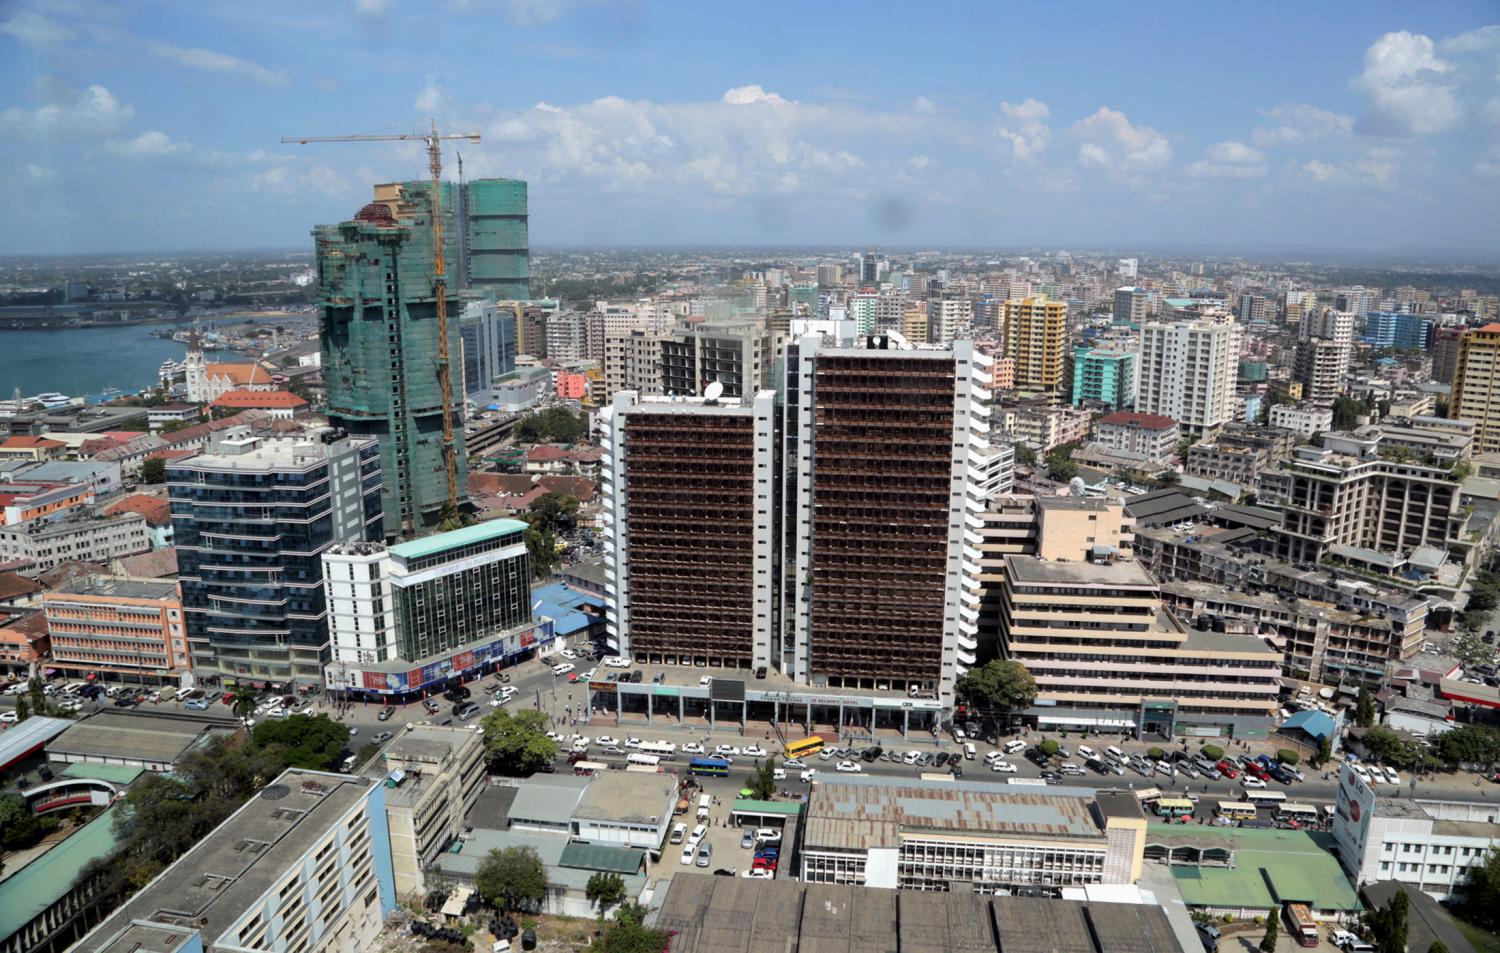 A general picture shows the skyline of Tanzania's port city of Dar es Salaam, July 12, 2013. Tanzania's commercial capital looks like a boom town even before cash rolls in from gas discoveries that in the next few years could make the east African nation a major energy exporter. Glass-clad tower blocks pierce Dar es Salaam's sky-line and more are emerging from noisy building sites. Billboards advertise high-definition televisions and other electronics to a new middle class, who crowd brand new shopping malls. REUTERS/Andrew Emmanuel (TANZANIA - Tags: SOCIETY BUSINESS ENERGY) - GM1E97C1S1L01